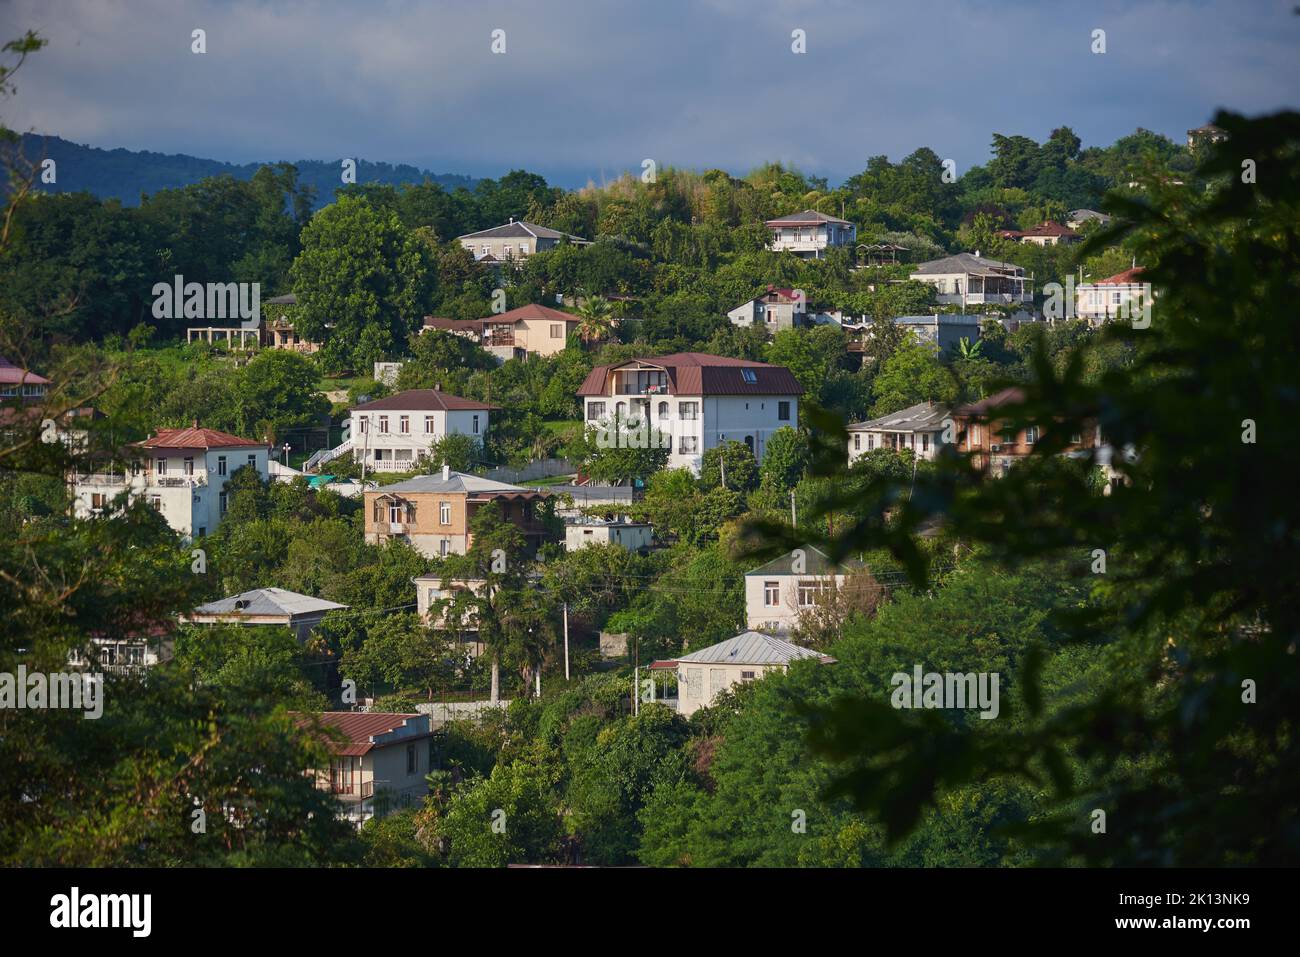 Stone white houses on the hillside among the trees. A small town on a mountain. Stock Photo